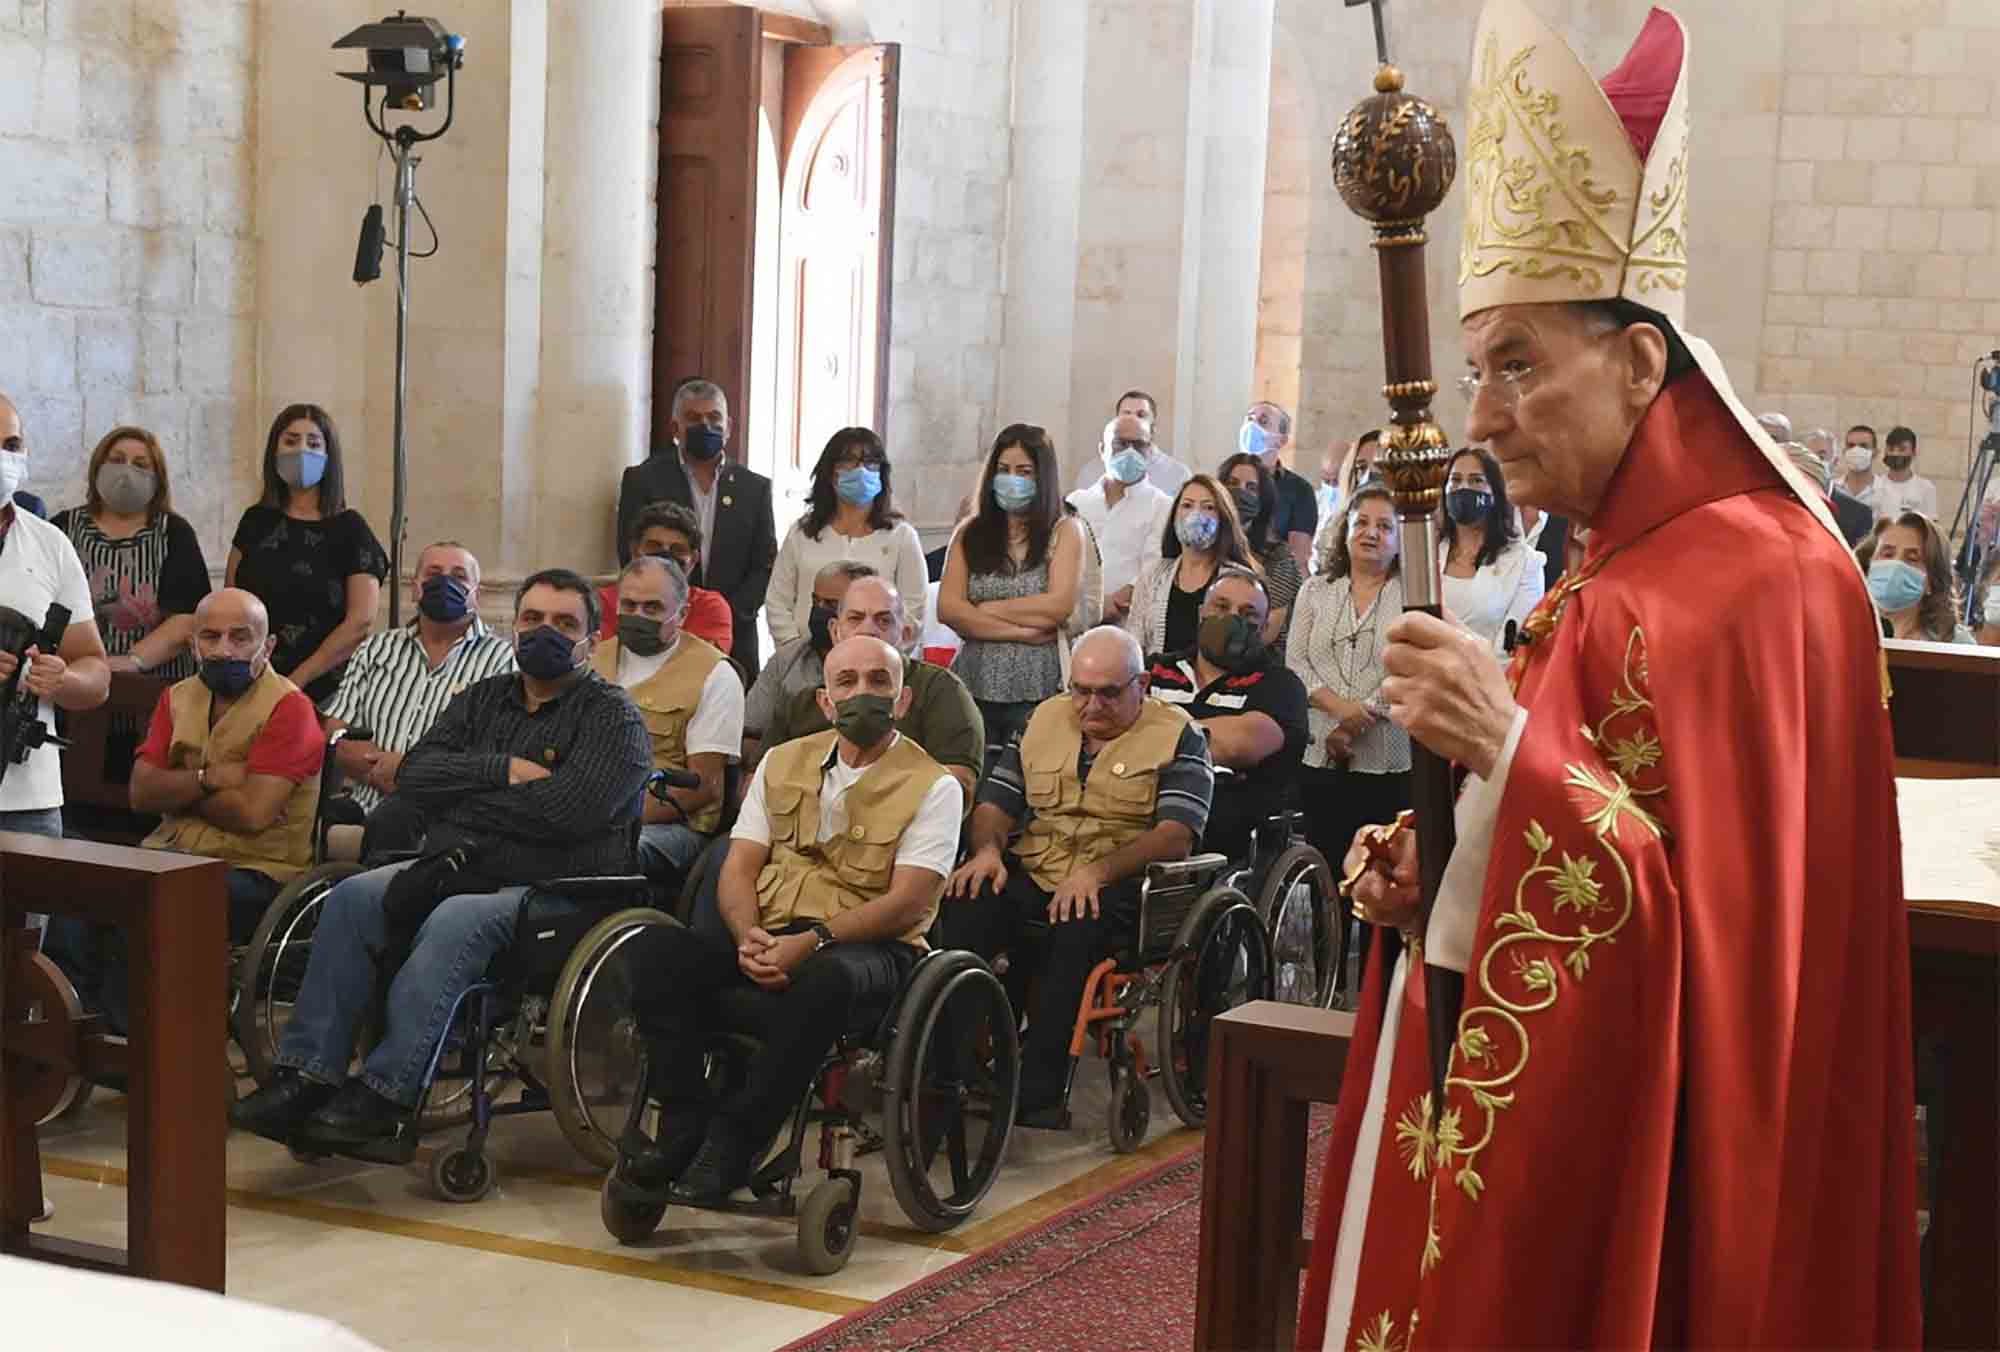 The Maronite Patriarch Béchara Boutros Rahi celebrating mass in front of a delegation of veterans. Photo Credit: NNA